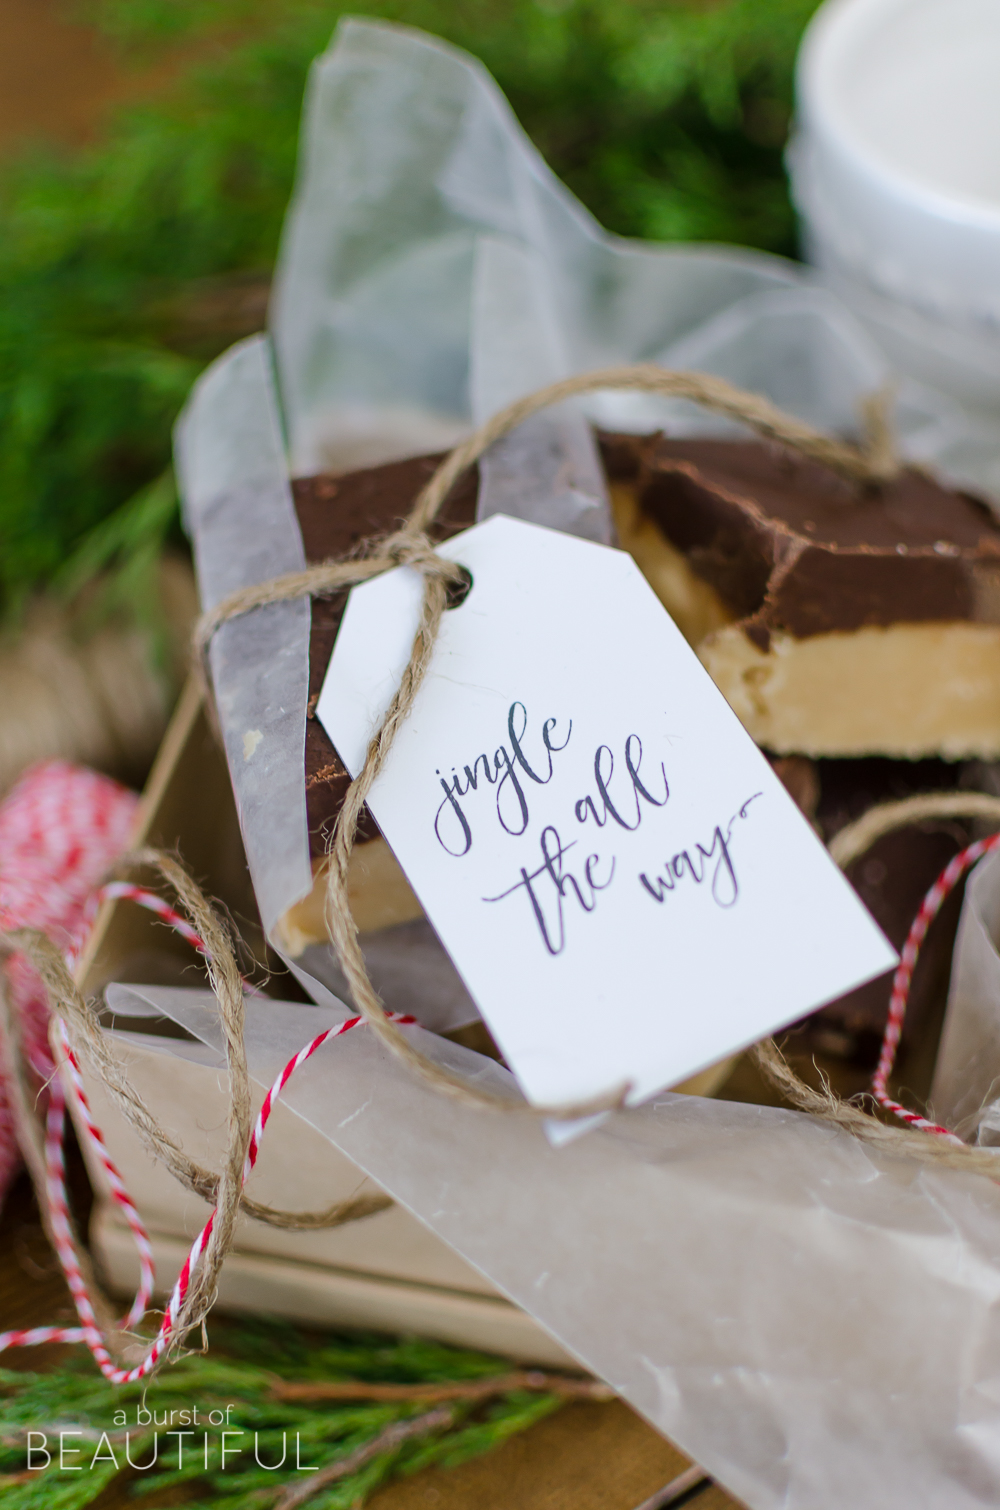 This rich and creamy Chocolate Peanut Butter Fudge will melt in your mouth. Wrap it up as a thoughtful and sweet holiday gift this year. 